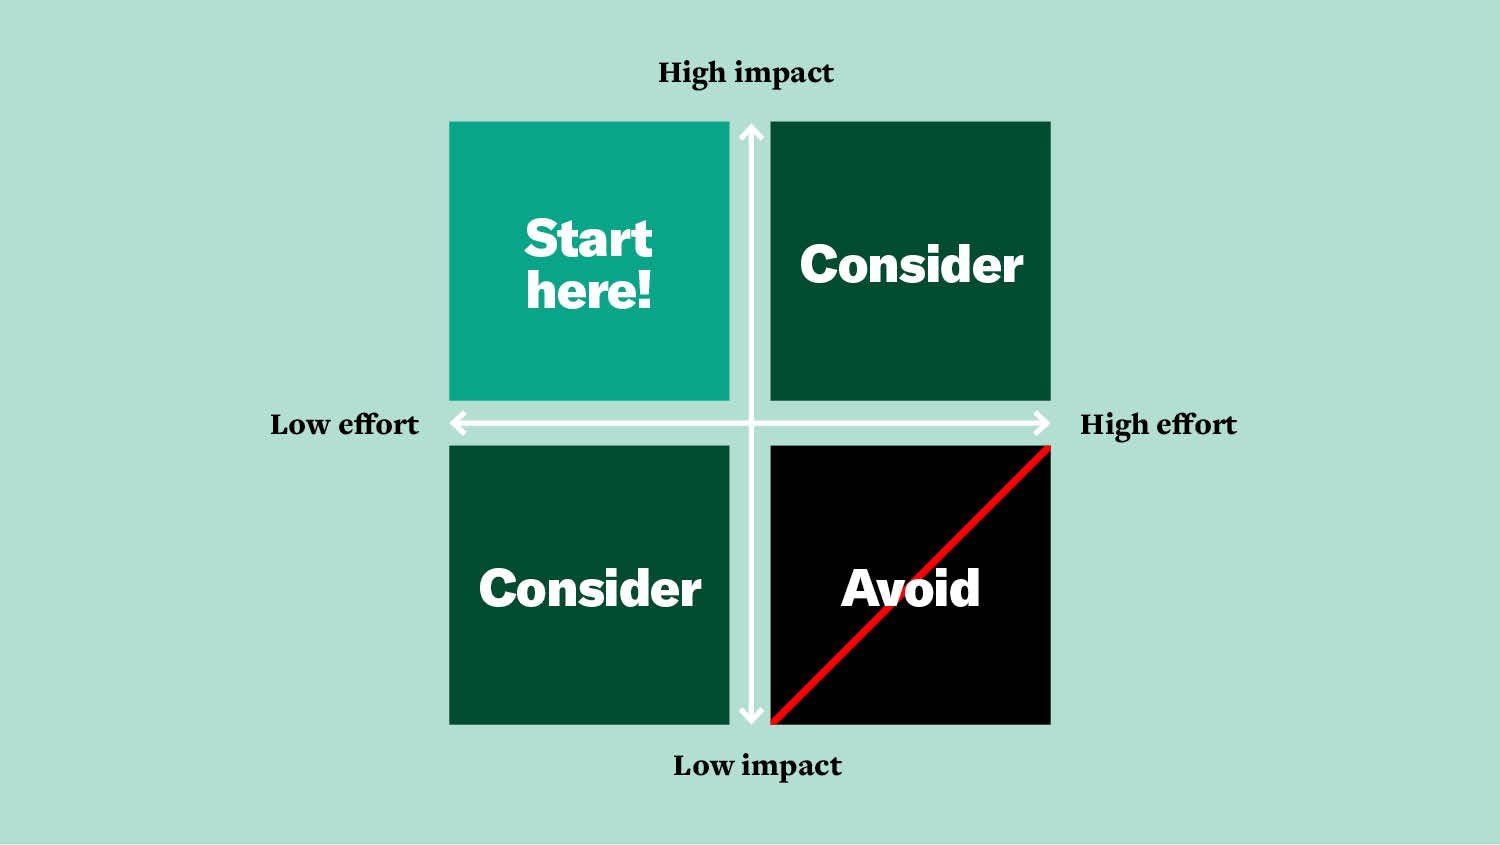 A chart divided into four quadrants shows that high-impact, low-effort work the best place to start; high-impact, high-effort work should be considered; low-impact, low-effort work should be considered; and low-impact, high-effort work should be avoided.